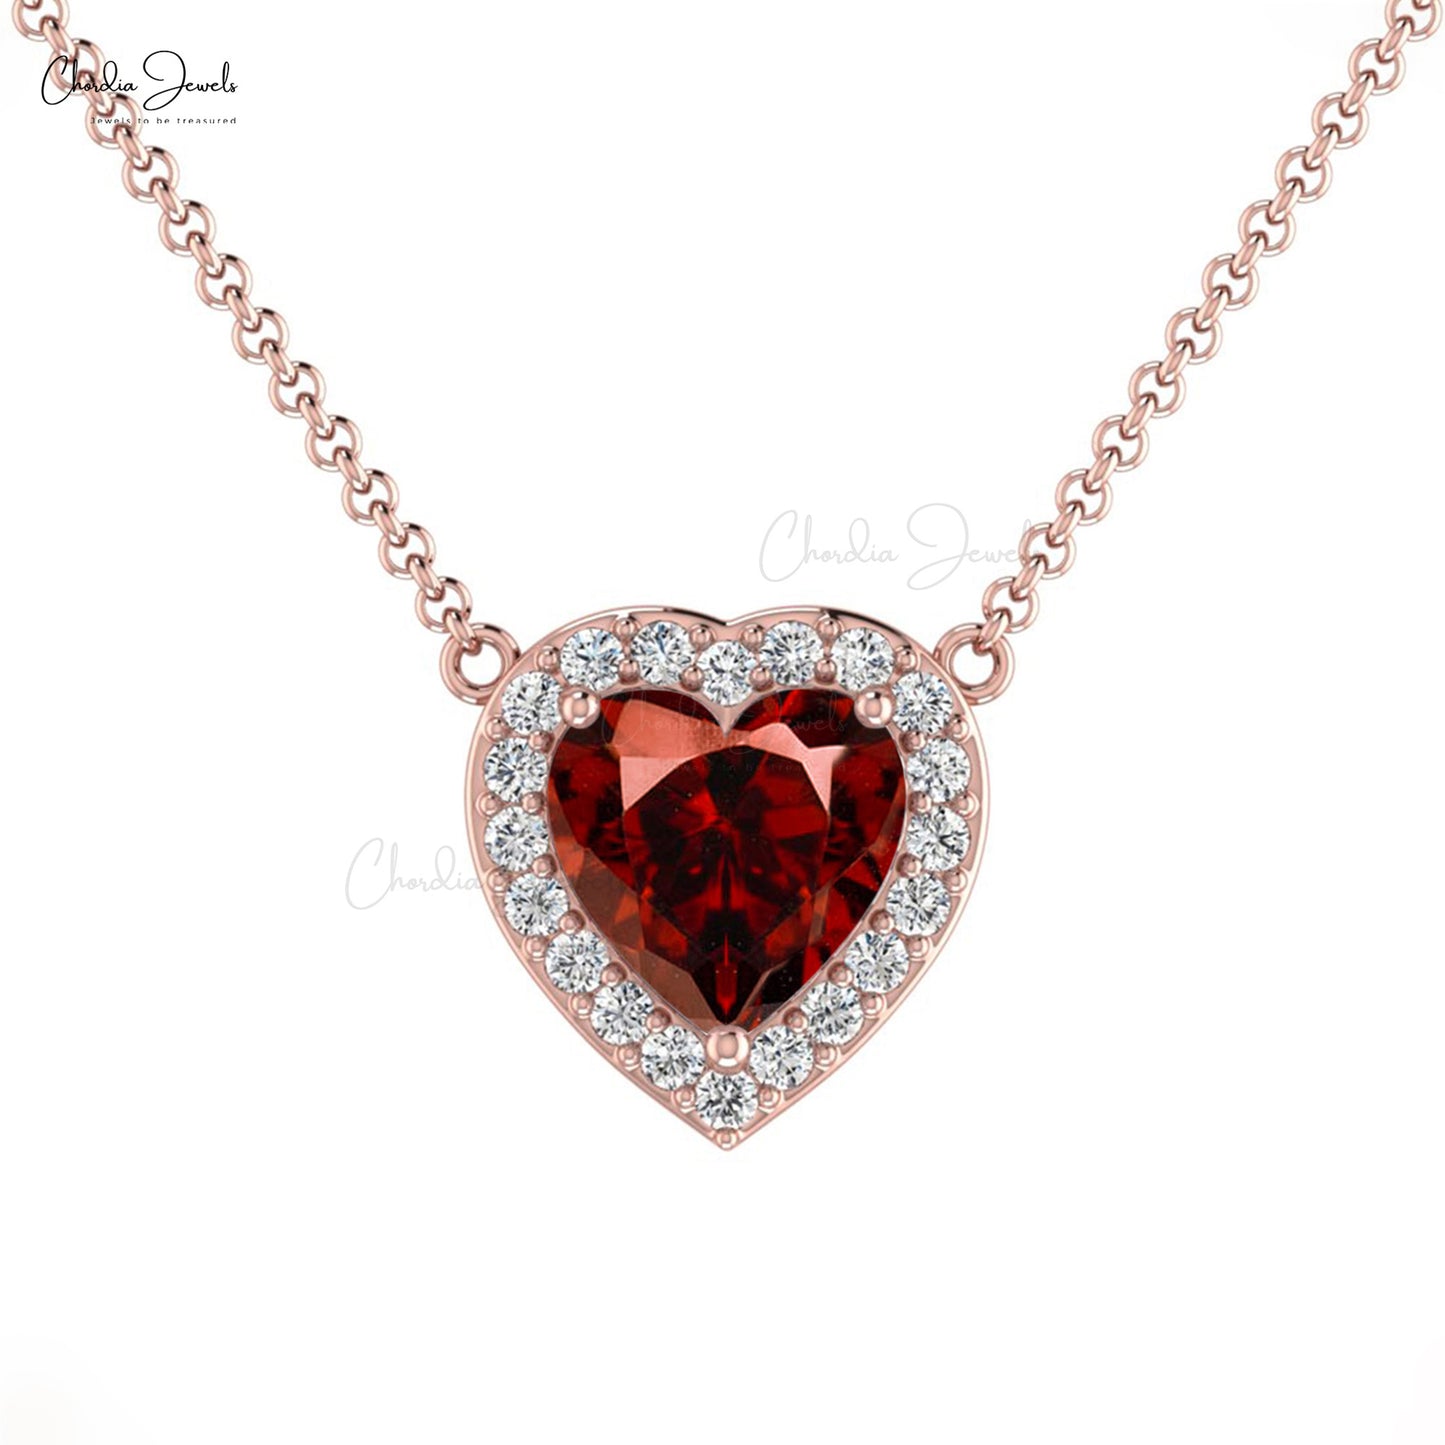 Genuine 0.6ct Red Garnet Solitaire Necklace 14k Solid Gold Diamond Halo Heart Necklace